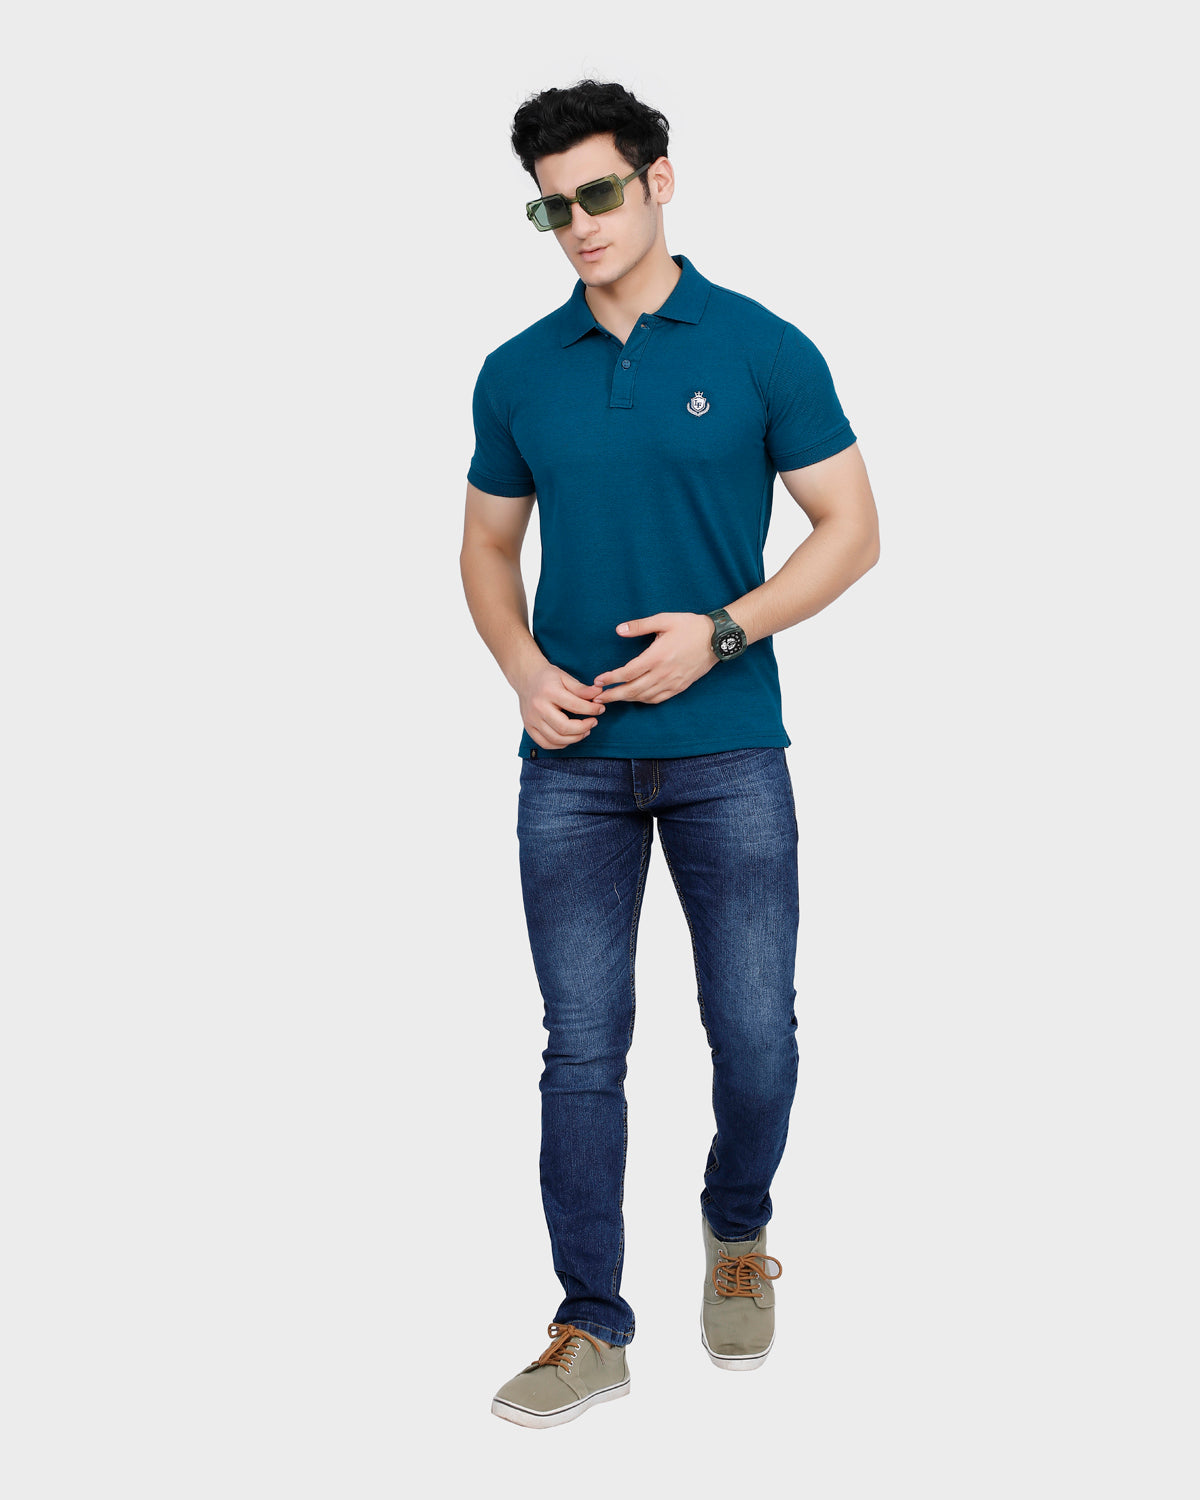 Men's Teal Solid Cotton Polo Shirt